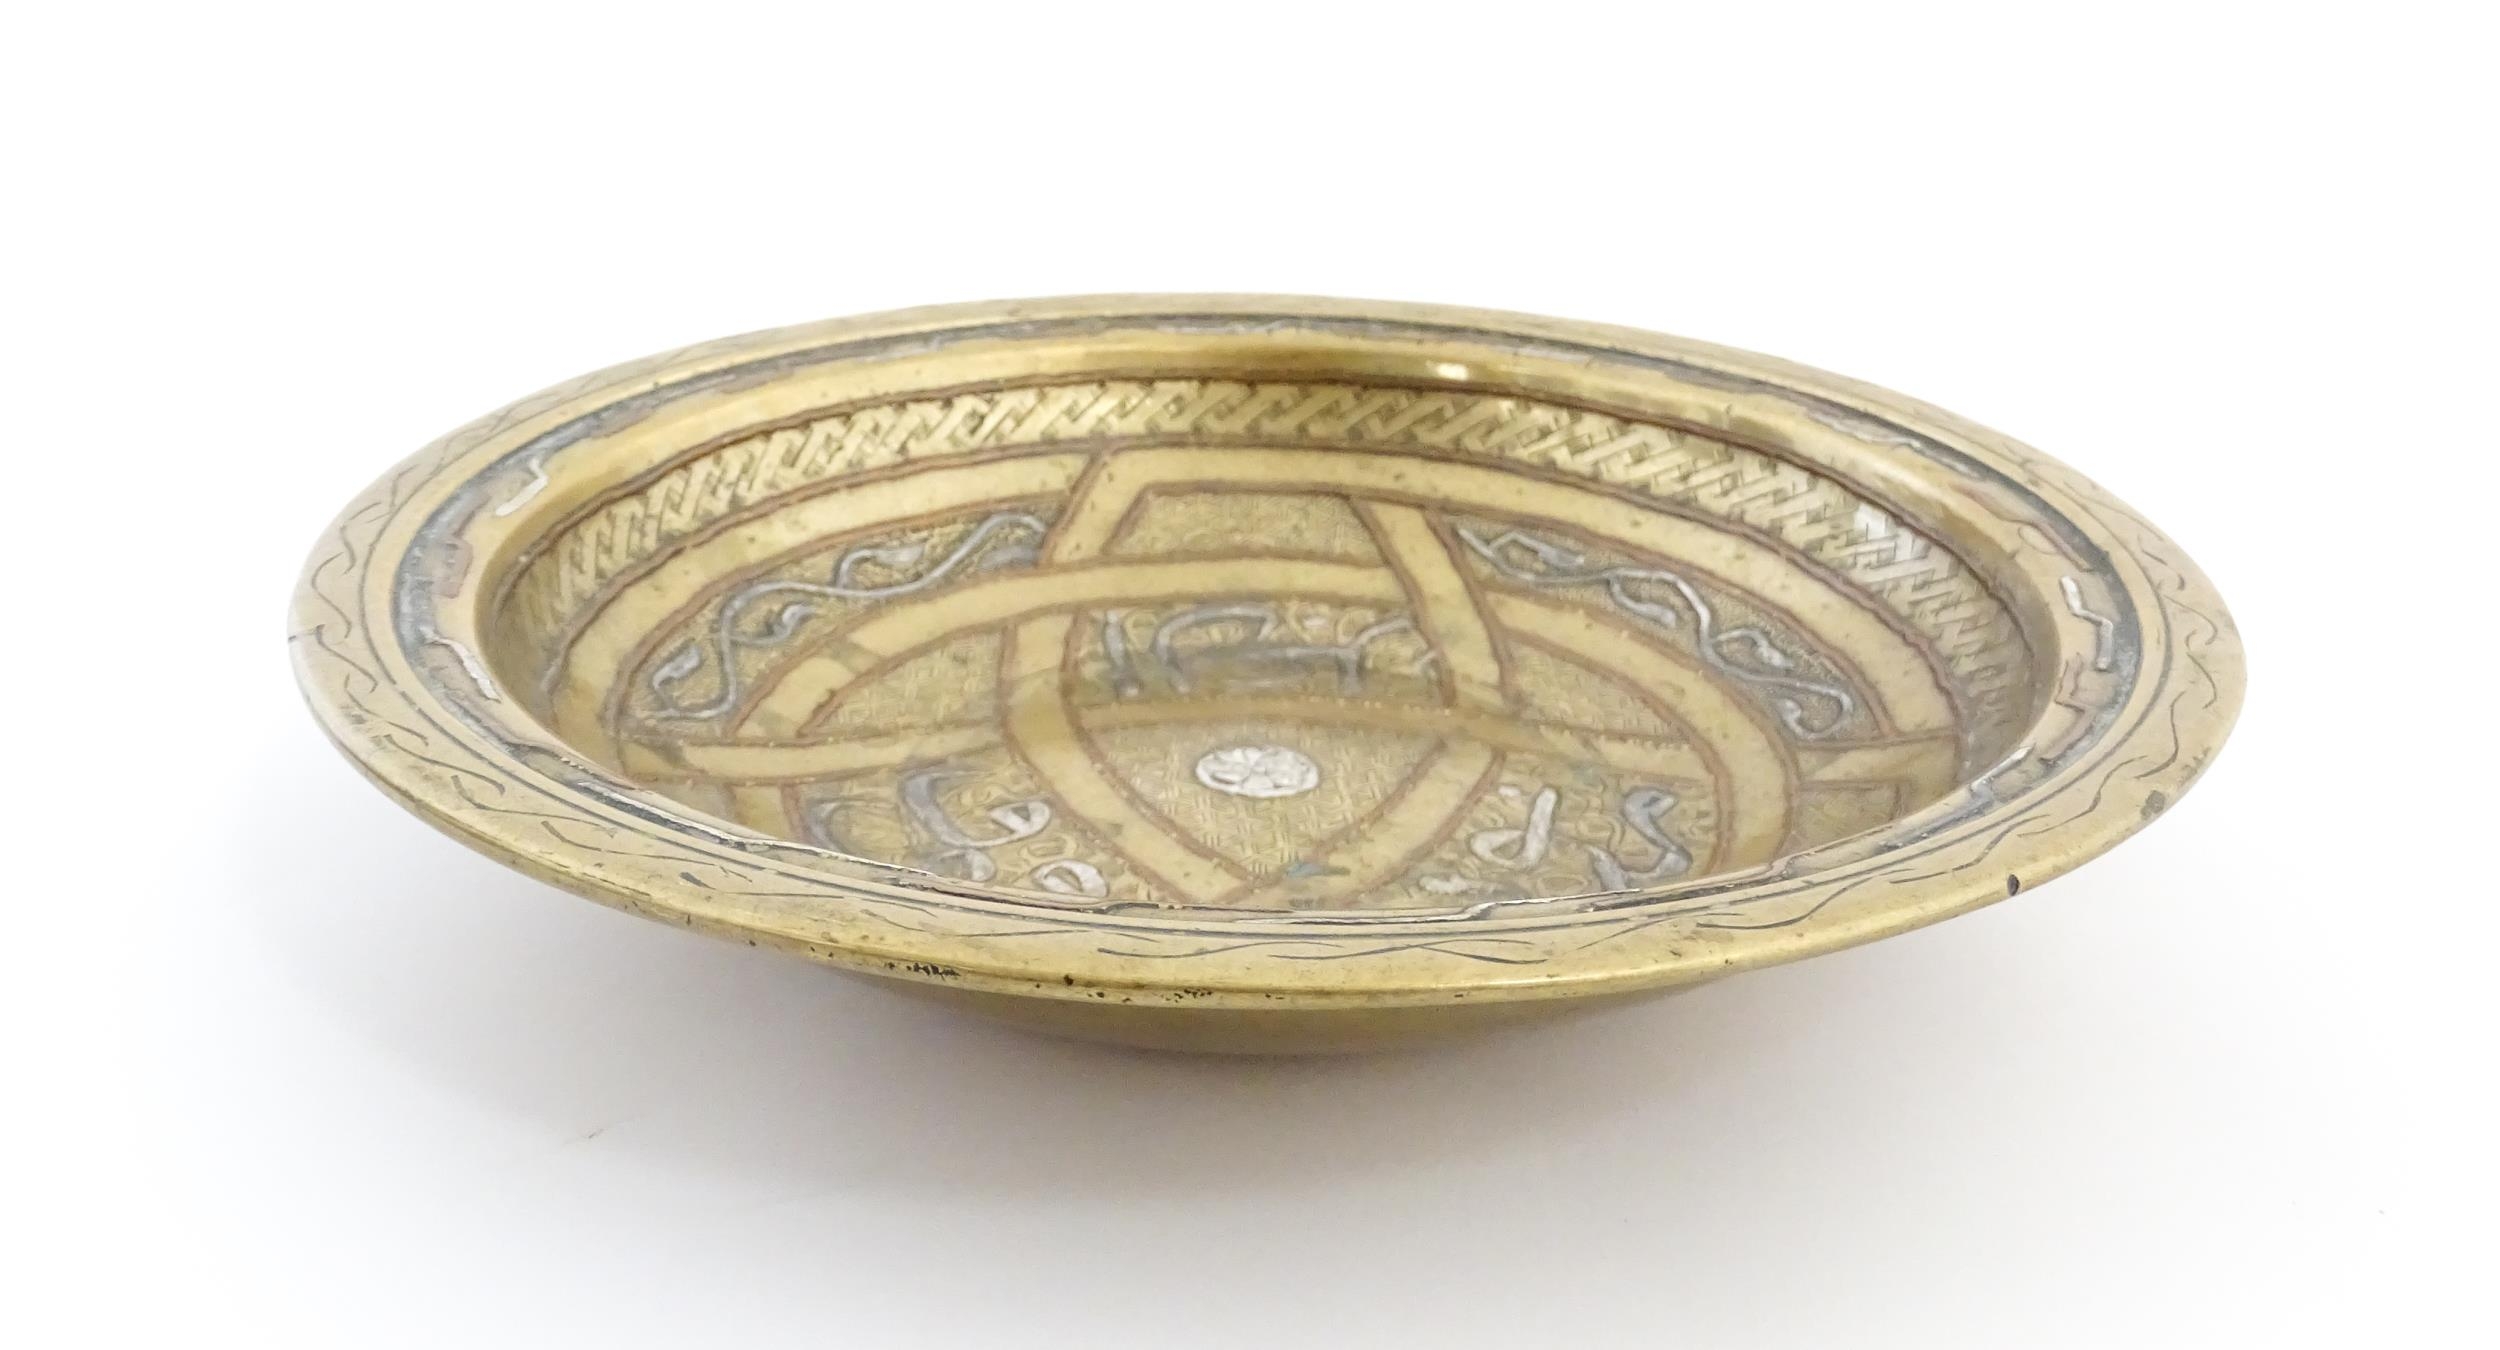 A Middle Eastern brass dish / bowl with incised detail and inlaid white metal and copper - Image 6 of 8